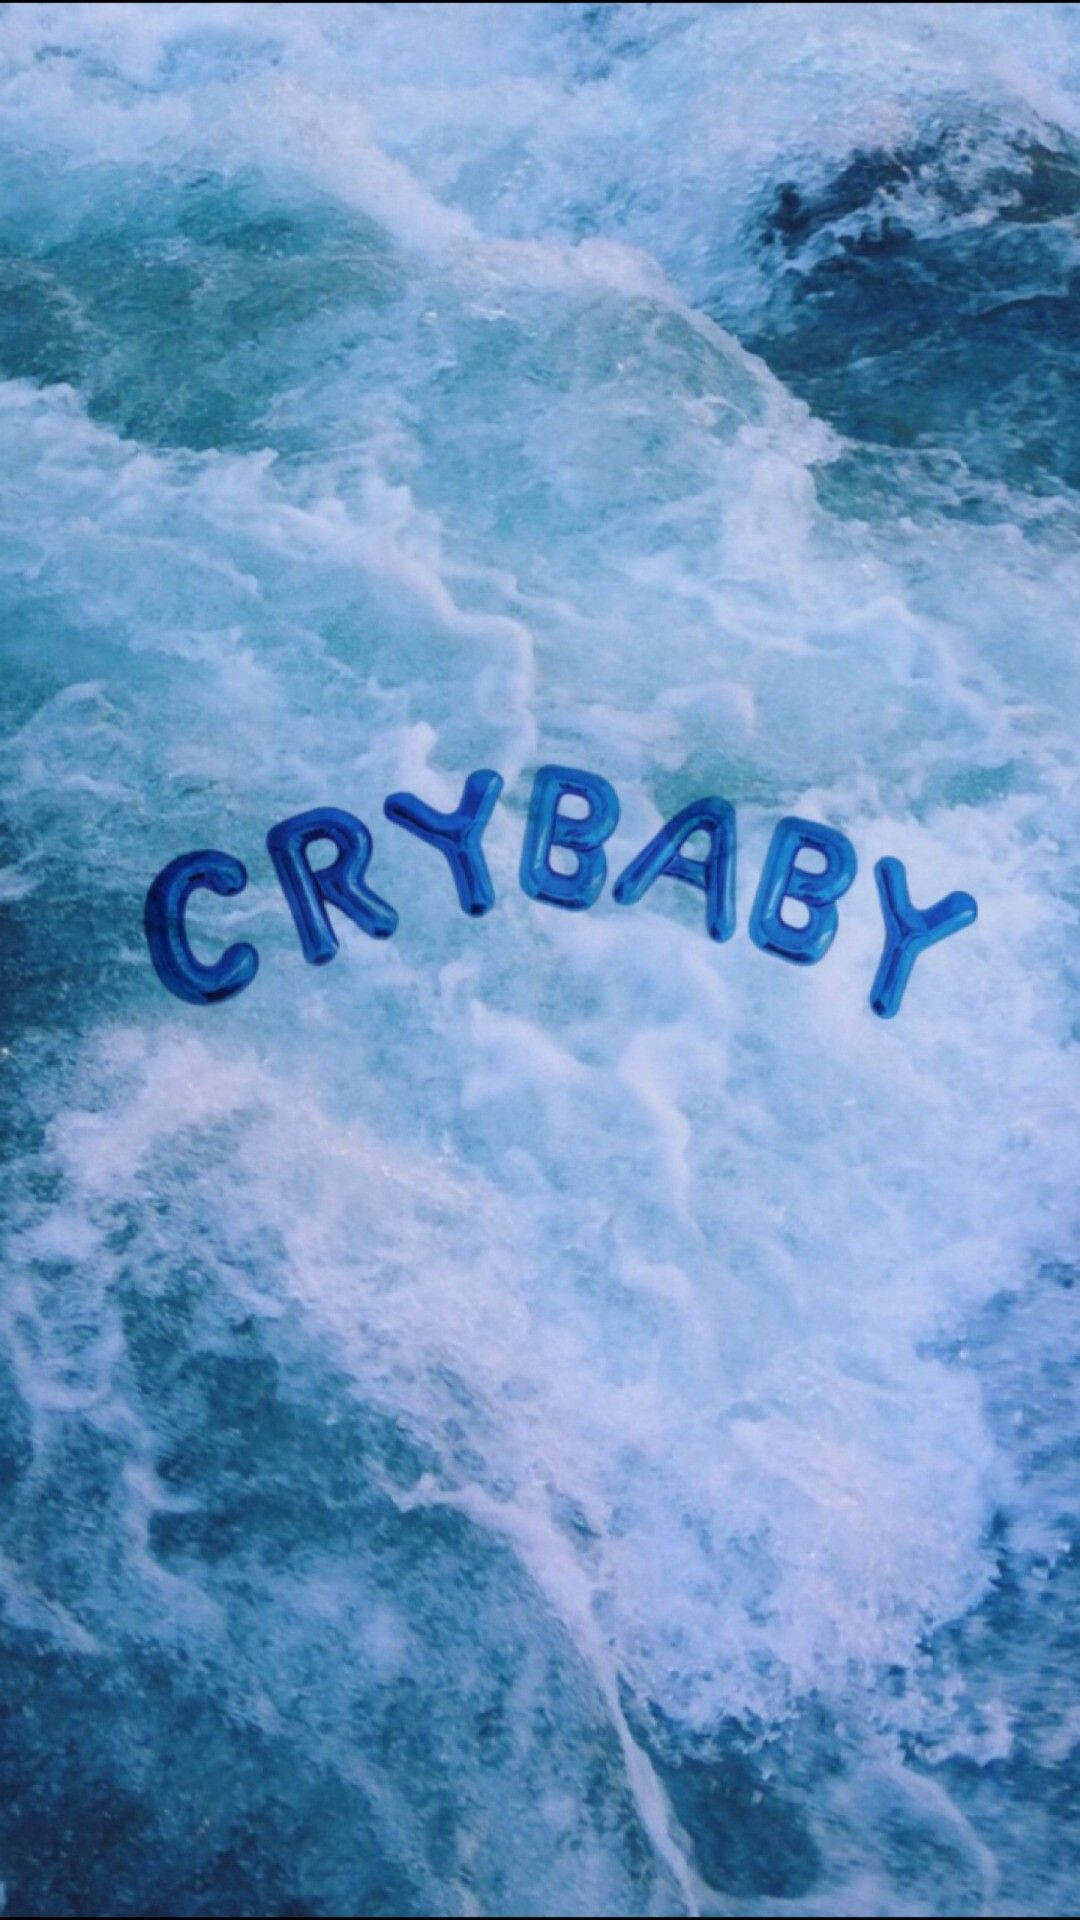 Crybaby - Cd Cover Kunst Wallpaper